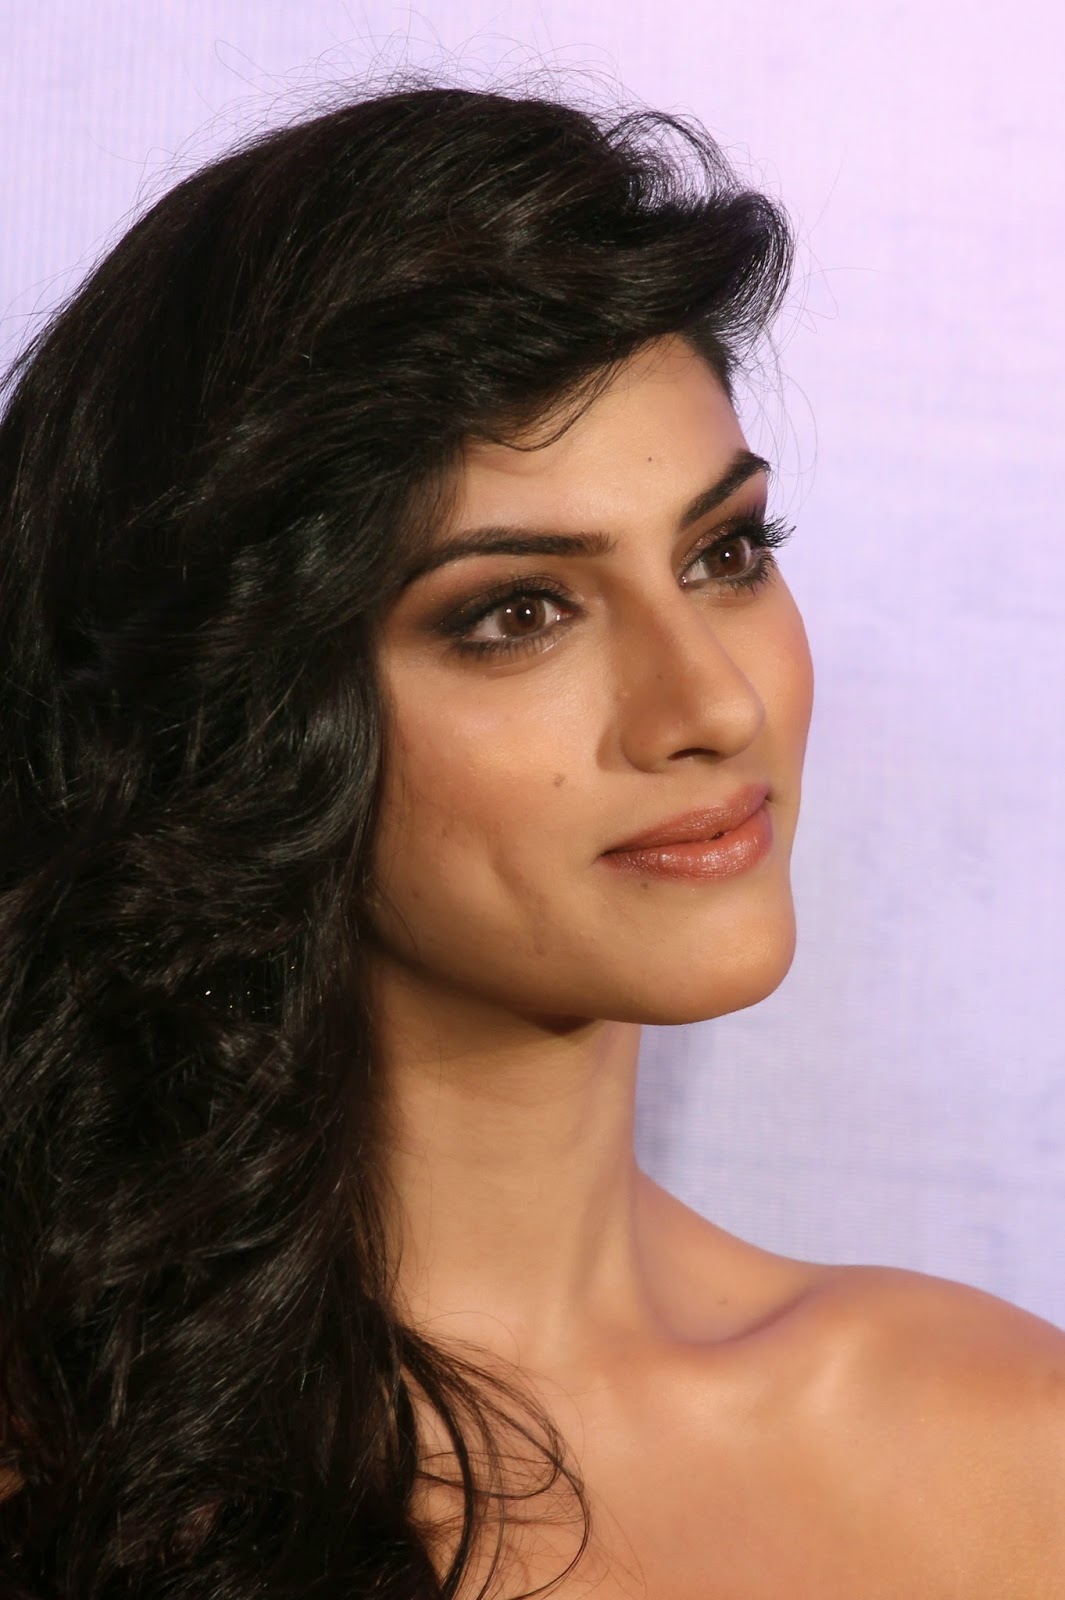 High Quality Bollywood Celebrity Pictures Sapna Pabbi Looks Smoking Hot In Black Dress At